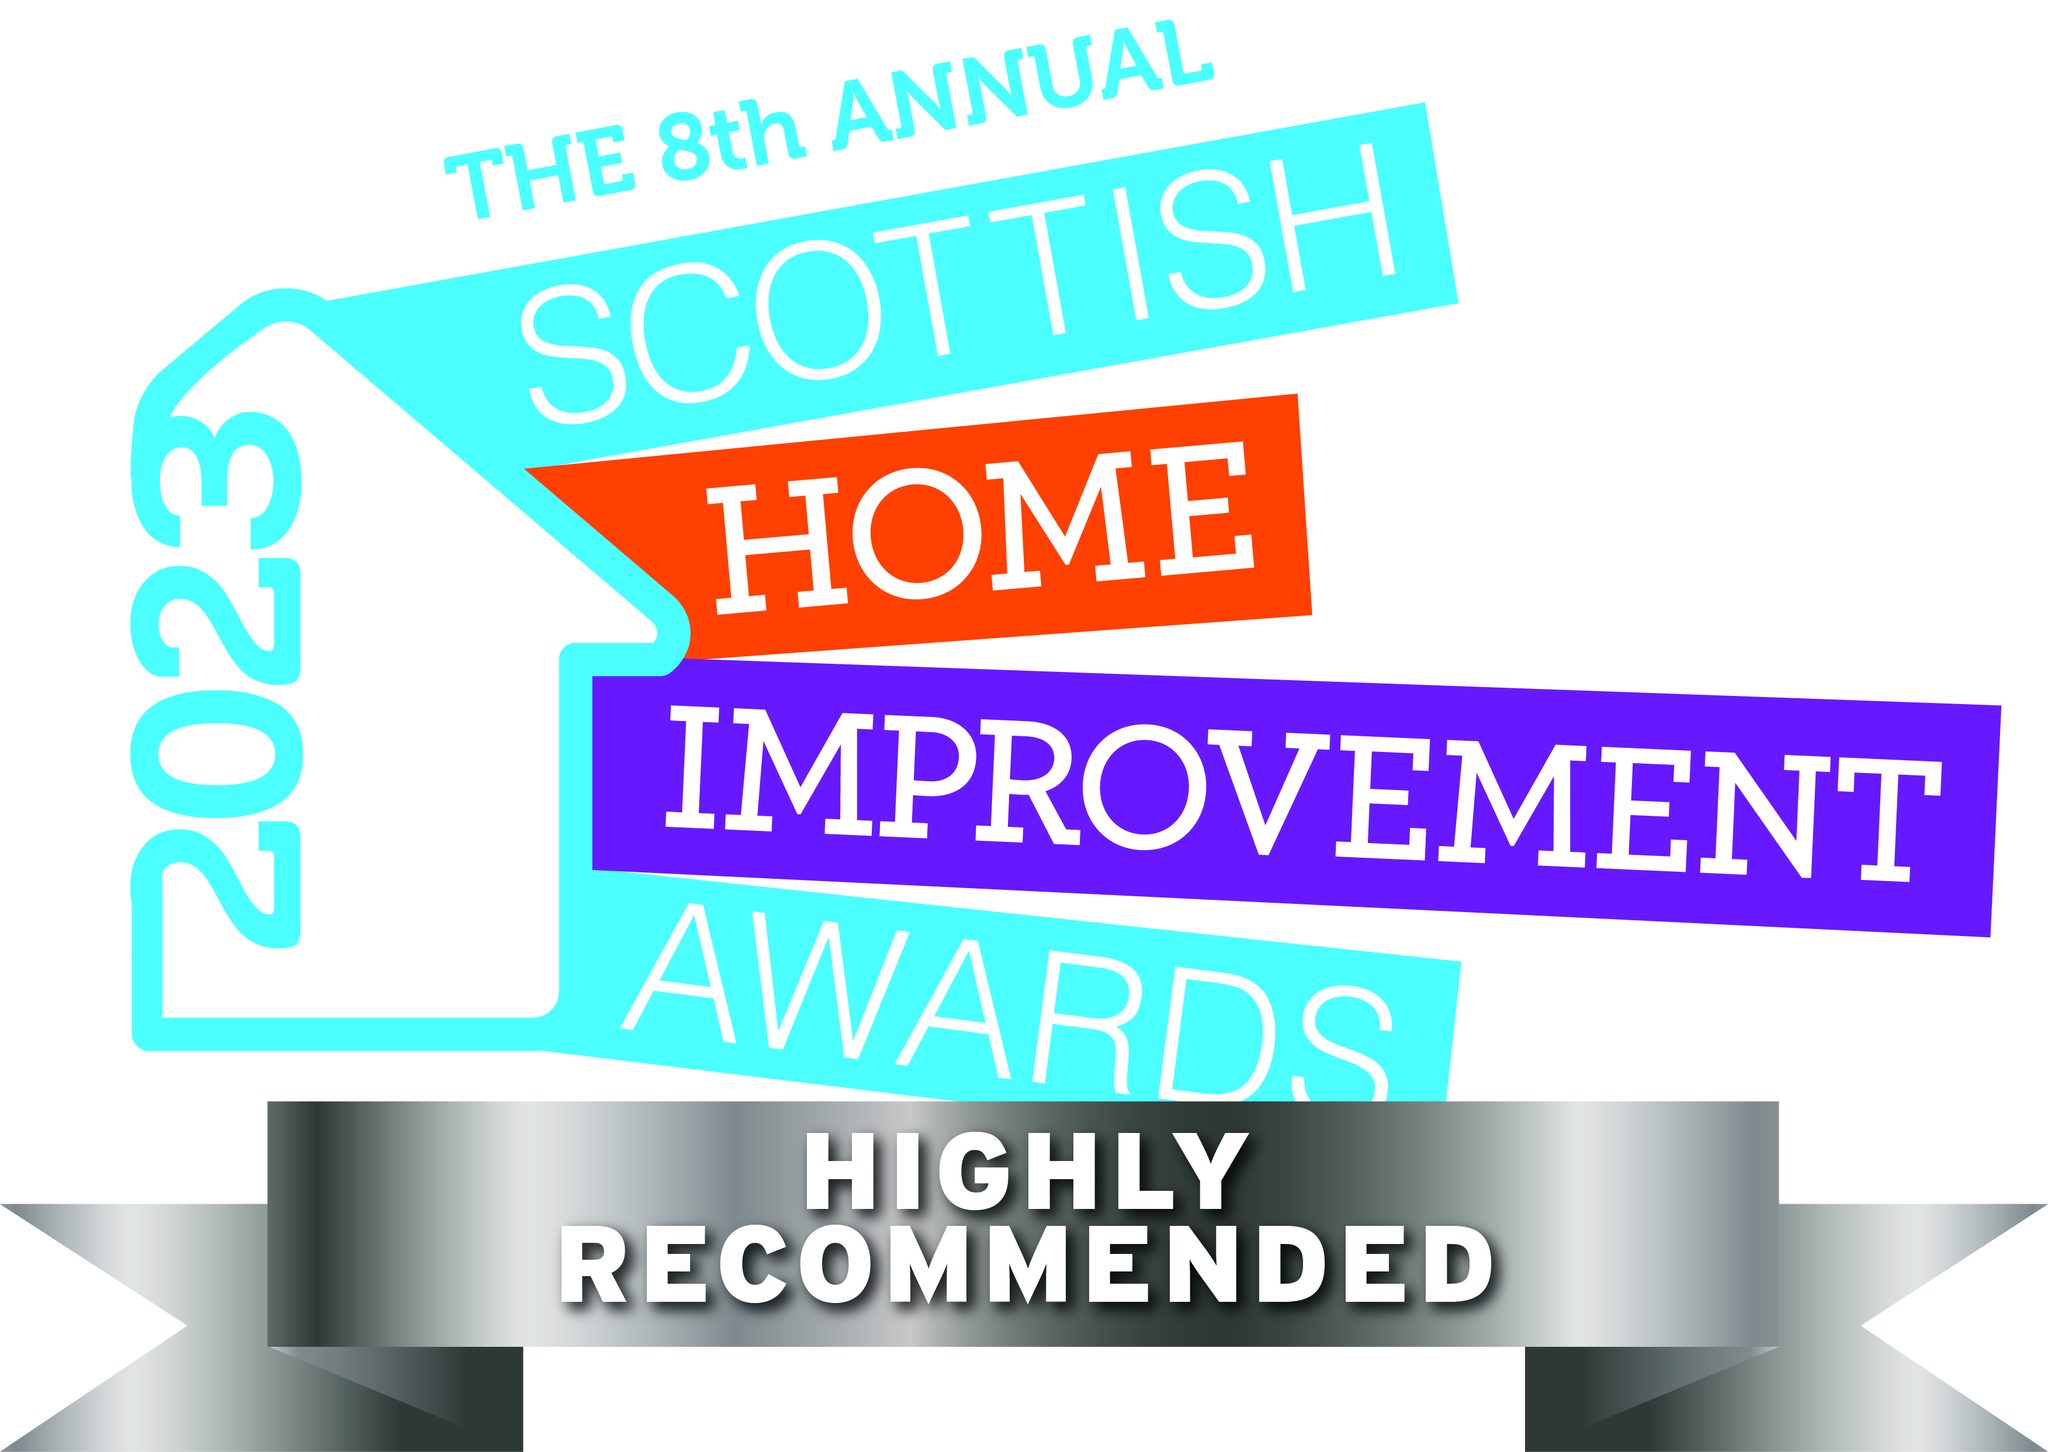 Scottish Home Improvement Awards Highly Recommended